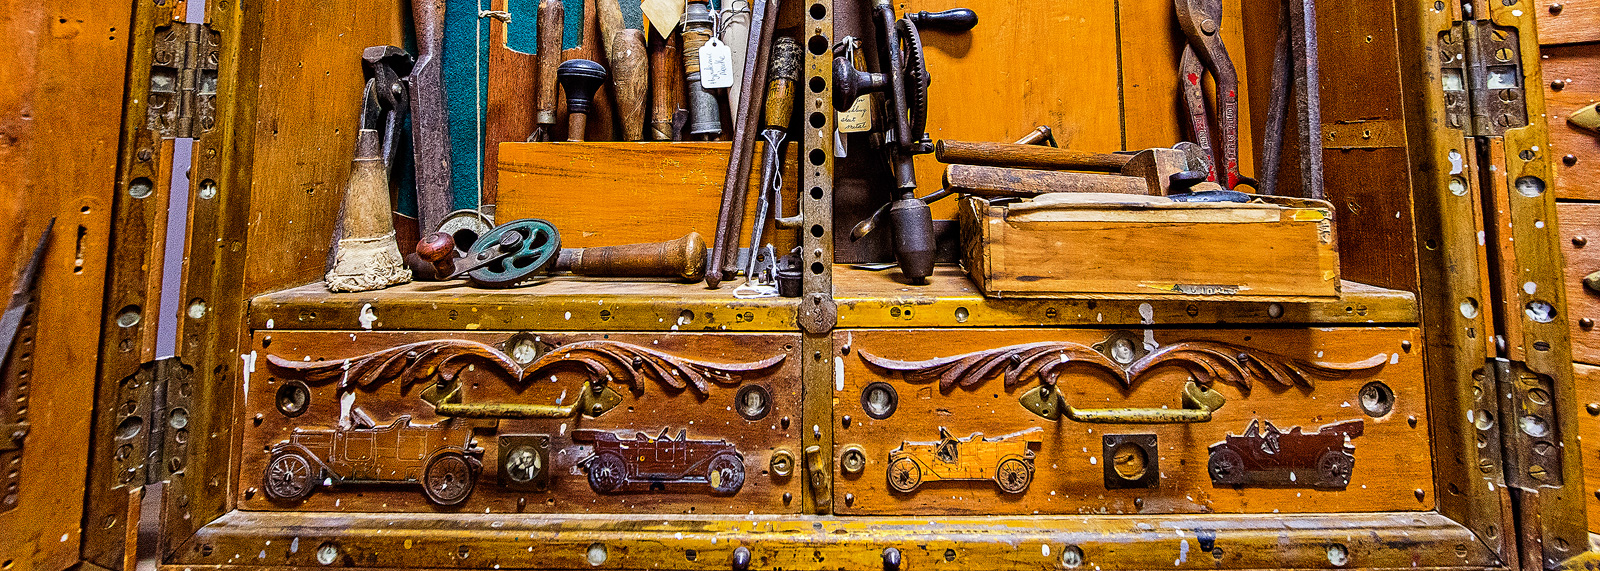 A Tool Chest at the Ypsilanti Historical Museum